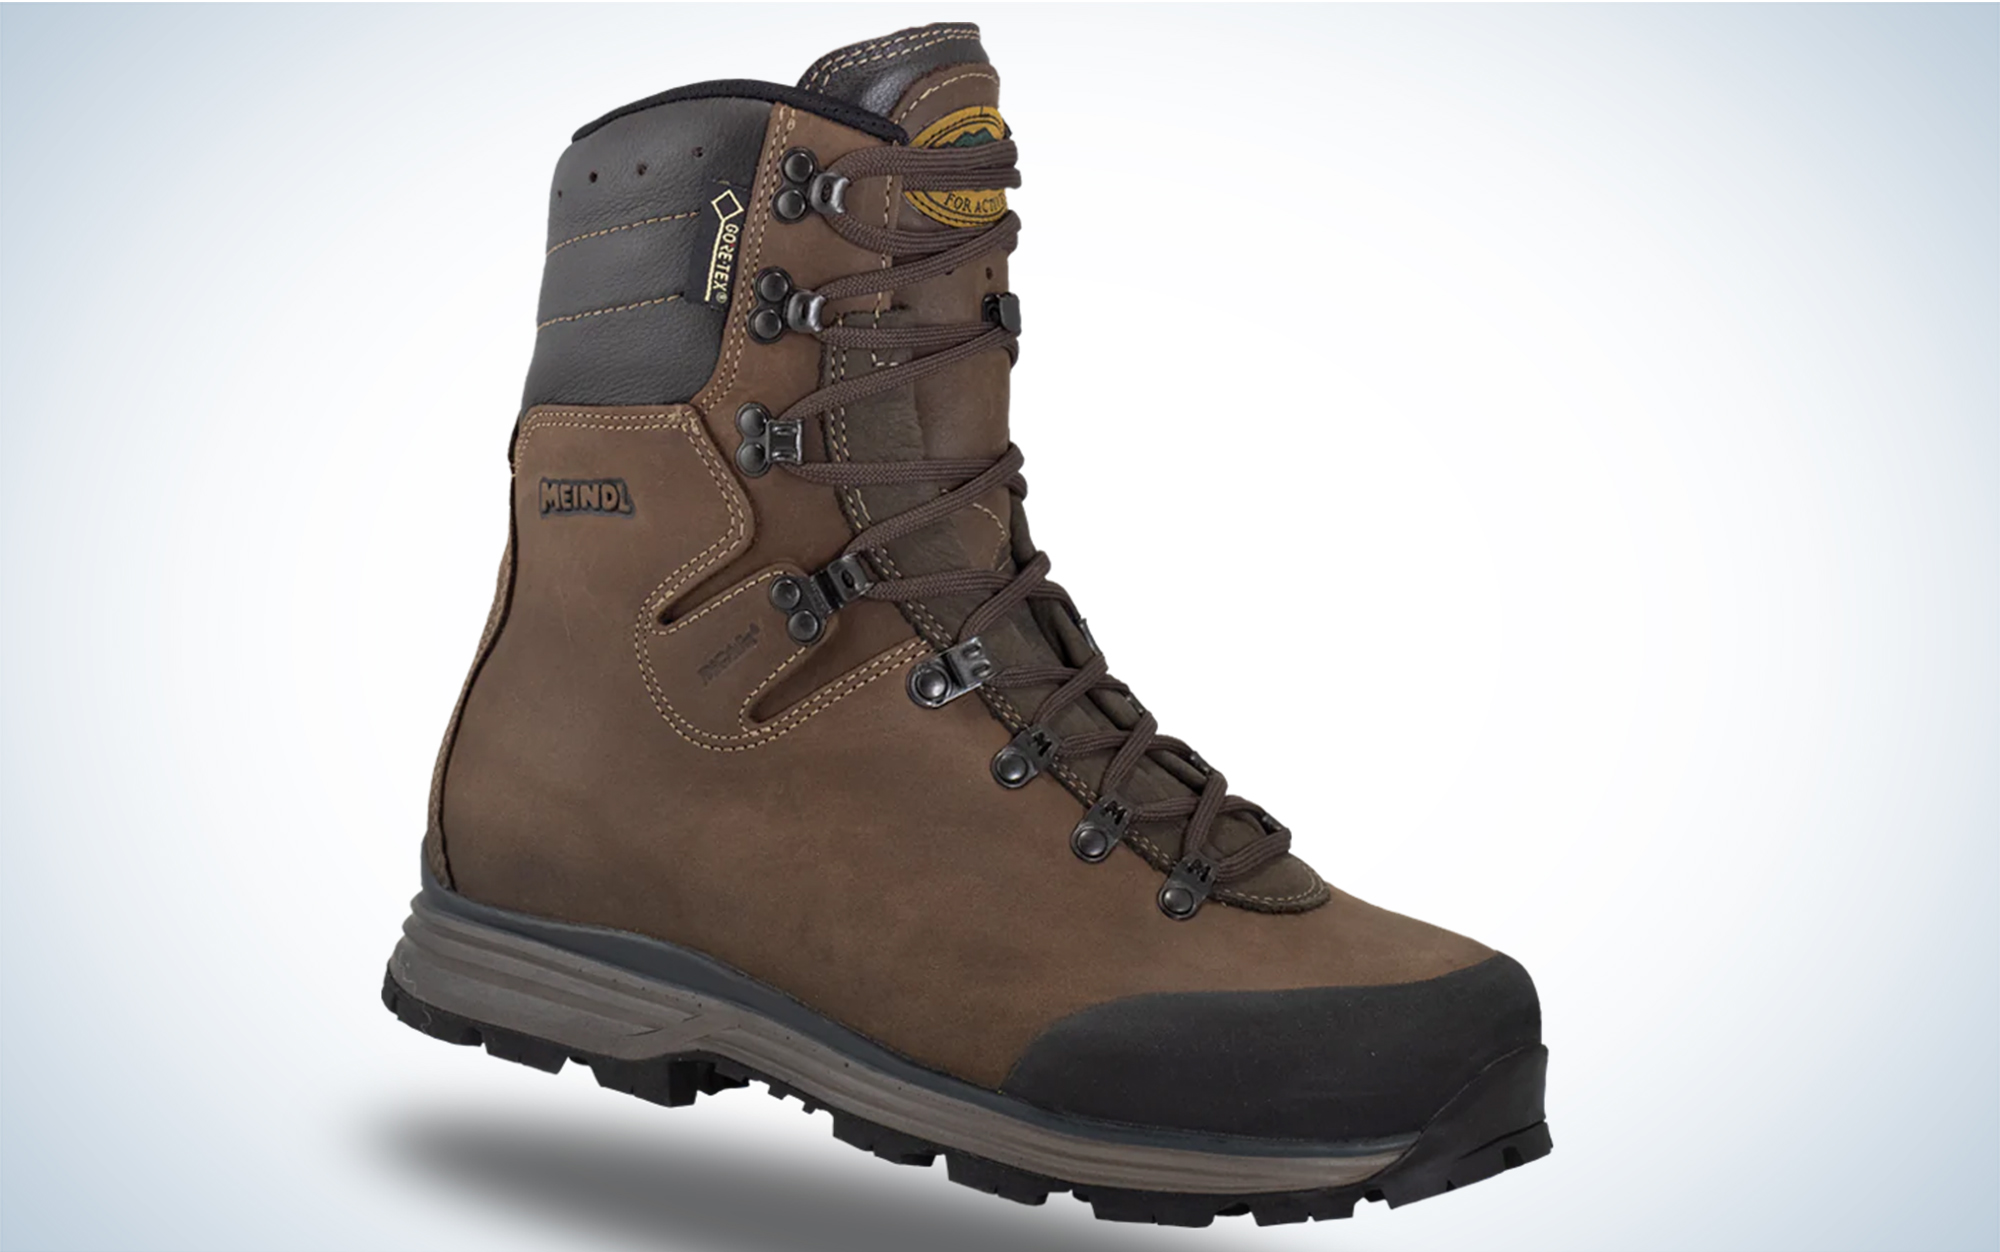 The Meindl Comfort Fit Hunter 400 is the best for bushwhacking.